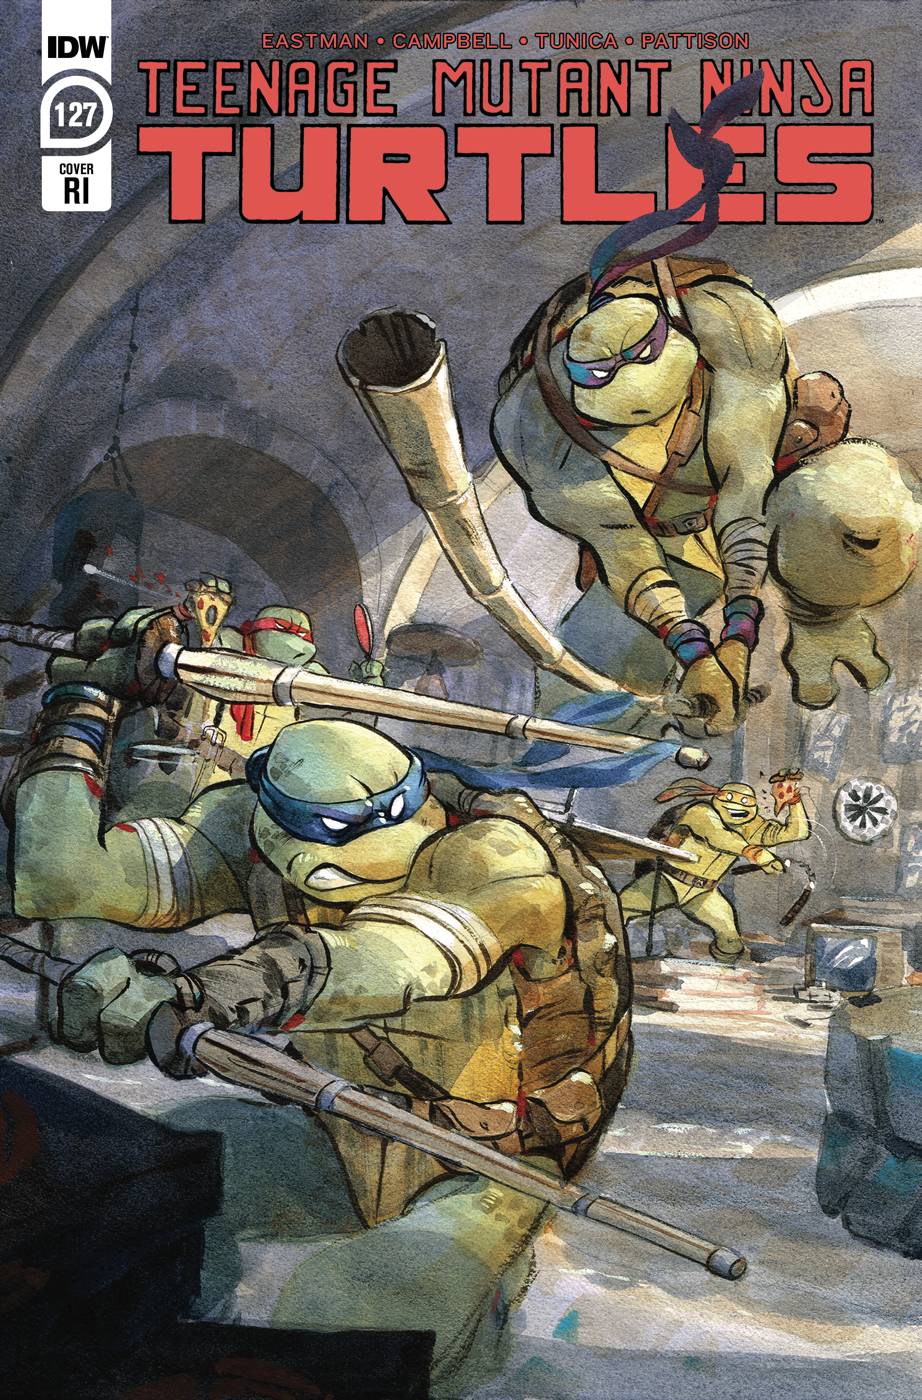 Teenage Mutant Ninja Turtles Ongoing #127 Cover C 1 for 10 Incentive Cullum (2011)